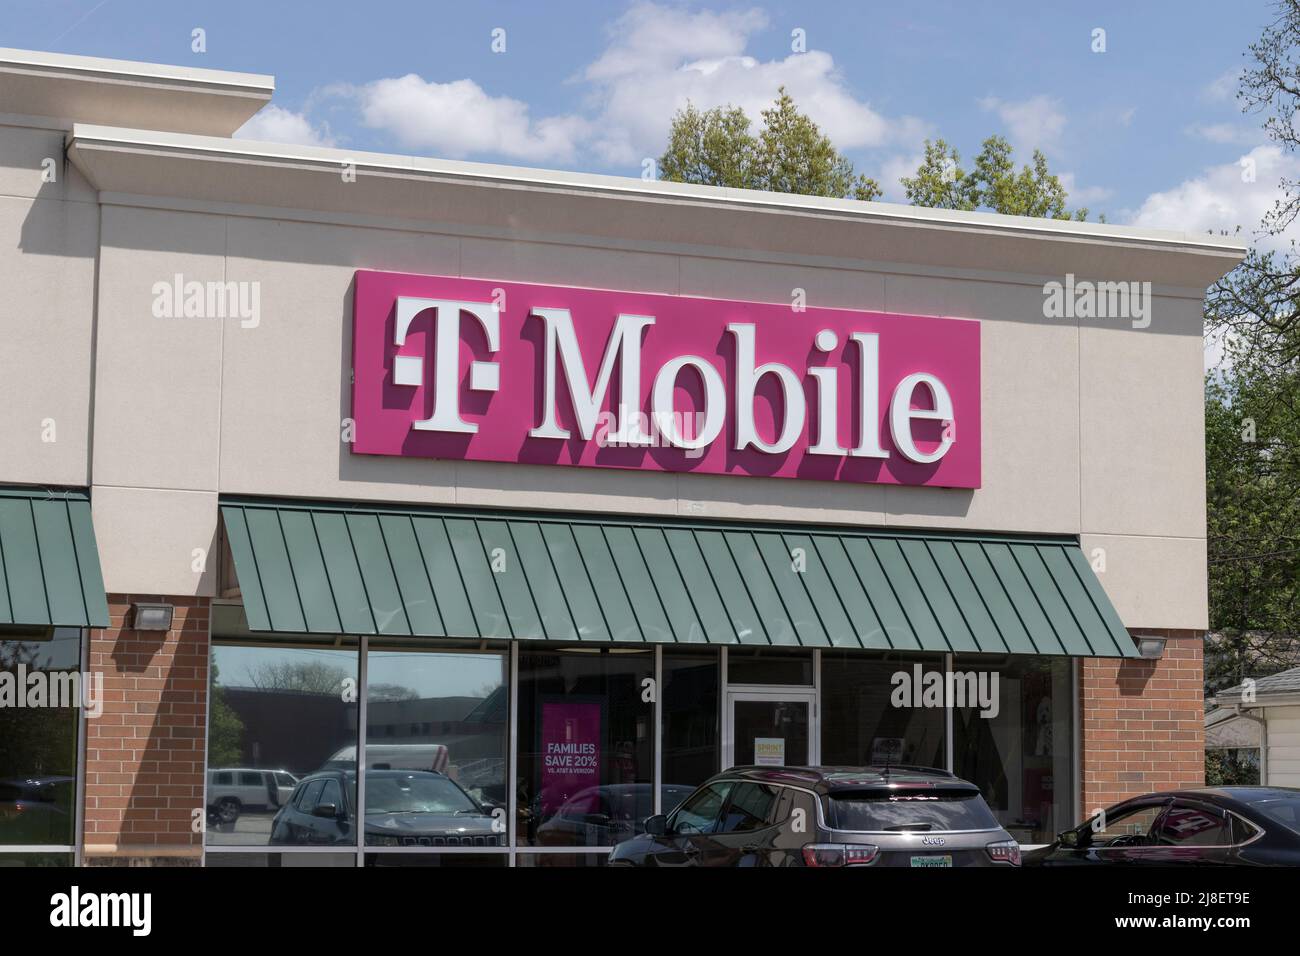 Elkhart - Circa May 2022: T-Mobile cell and mobile phone store. T-Mobile merged with Sprint to create a larger 5G internet and communications network. Stock Photo